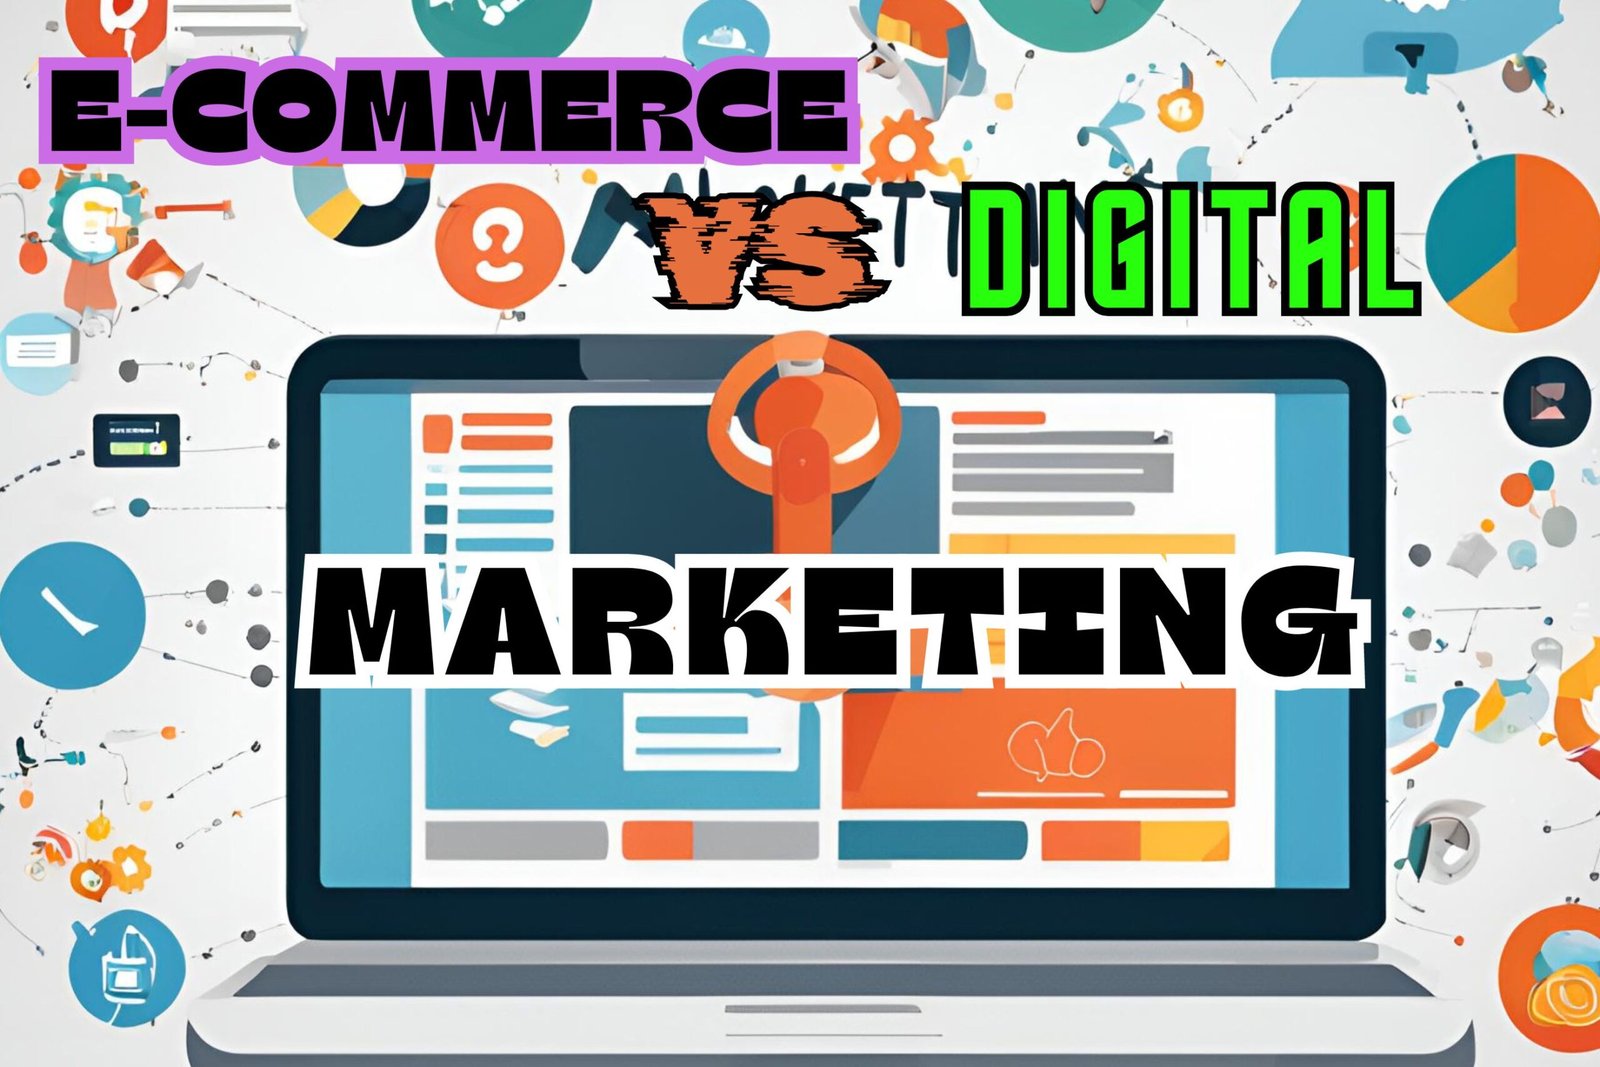 What is the Difference Between Digital Marketing and E-commerce